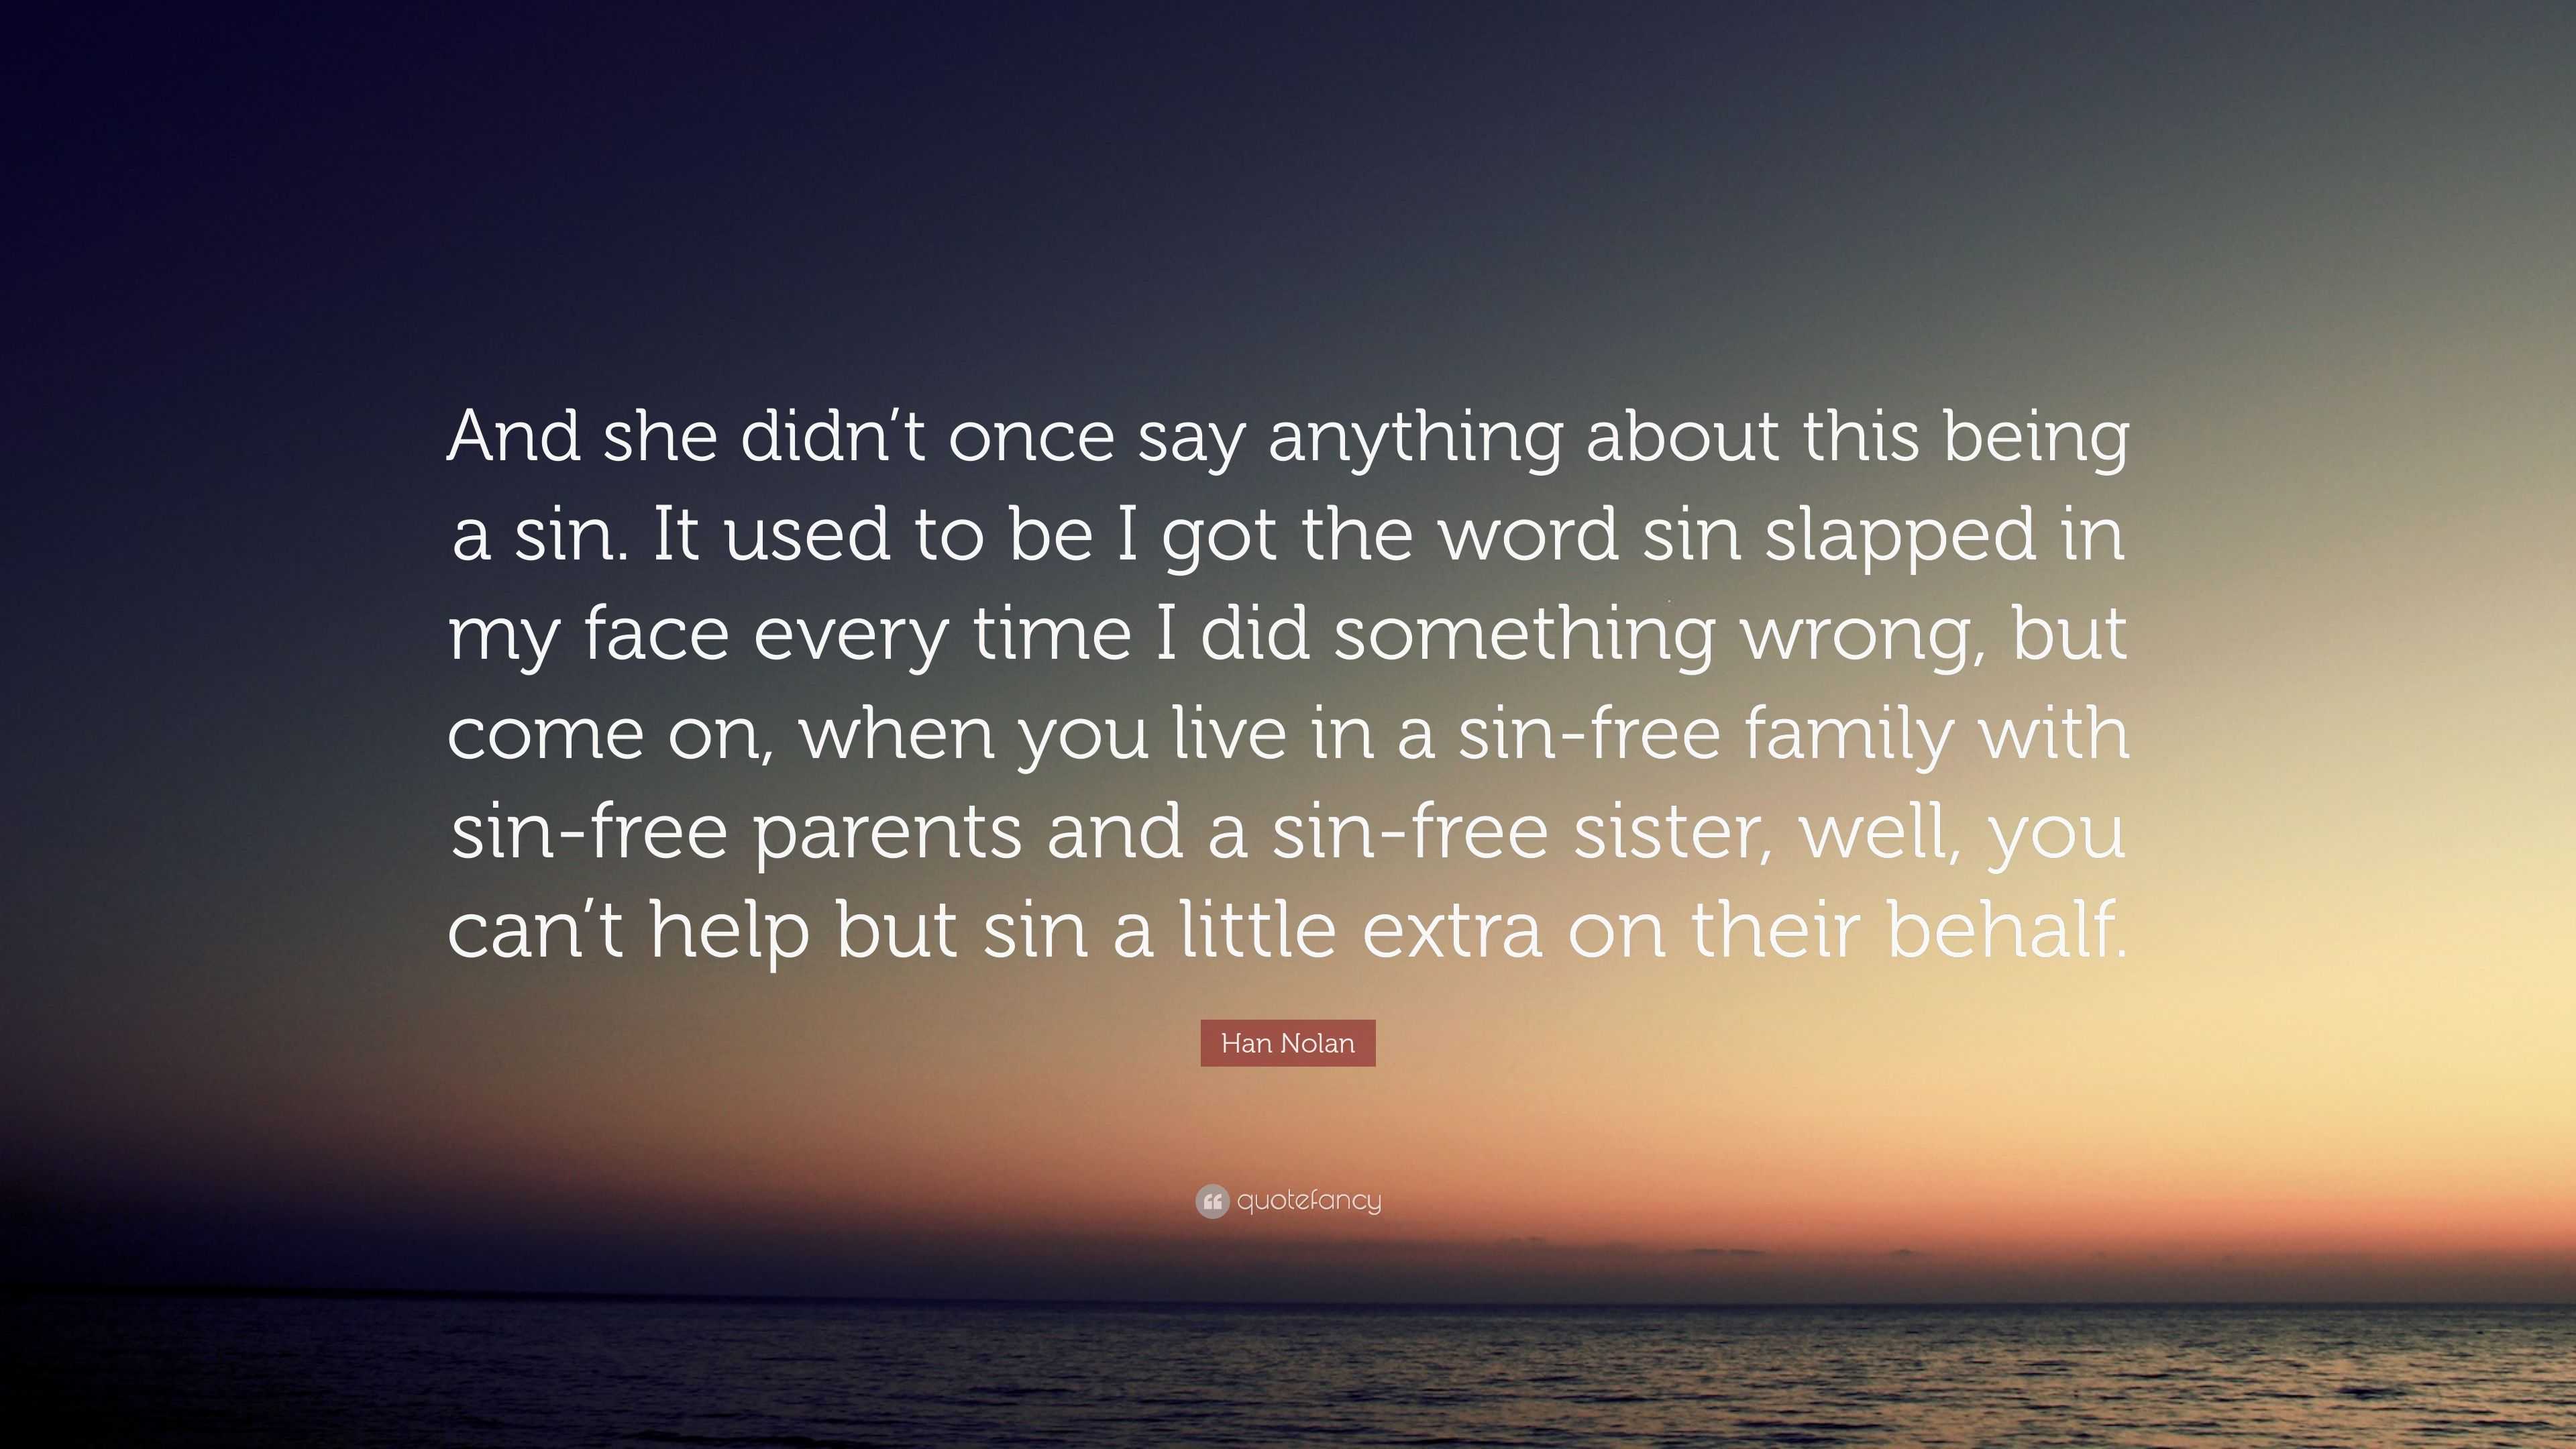 Han Nolan Quote: “And she didn't once say anything about this being a sin.  It used to be I got the word sin slapped in my face every time ...”